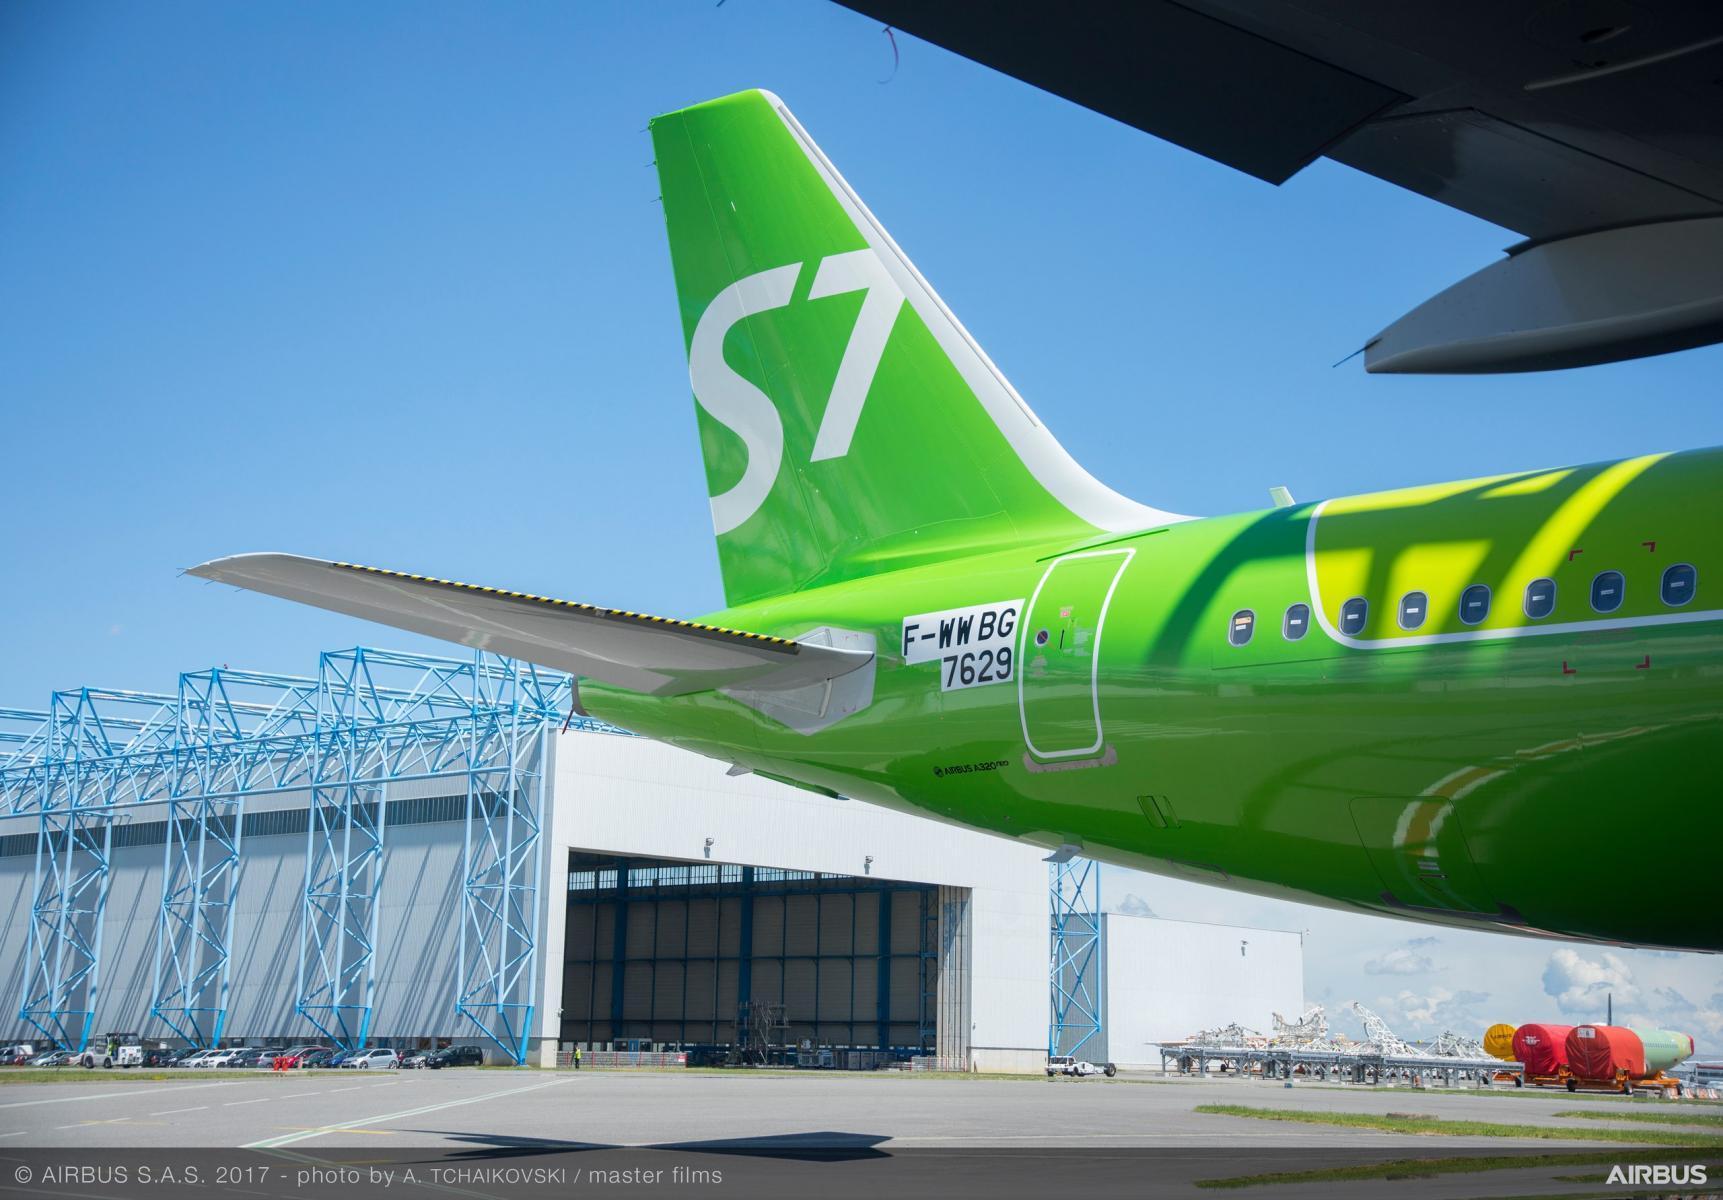 S7 airlines россия. S7 Airlines авиакомпания. Авиакомпания Сибирь s7 Airlines. Самолёты авиакомпании s7 Airlines. Самолет Джей Севен.